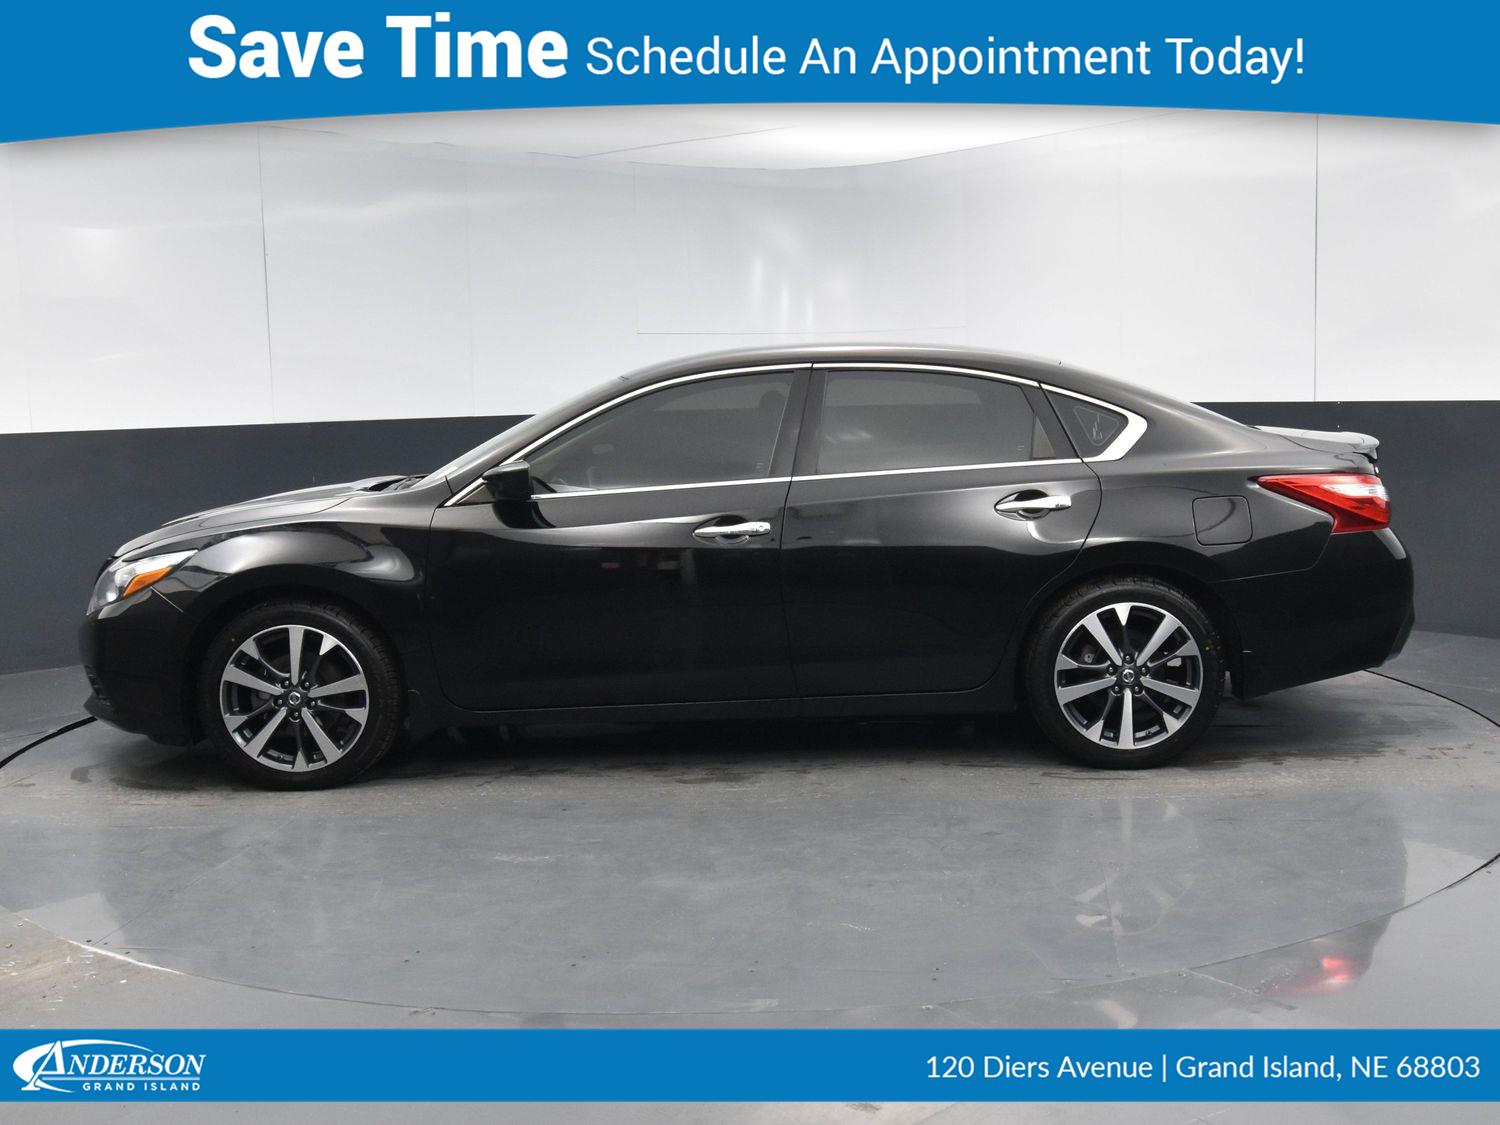 Used 2016 Nissan Altima 2.5 SR Stock: 2001578A